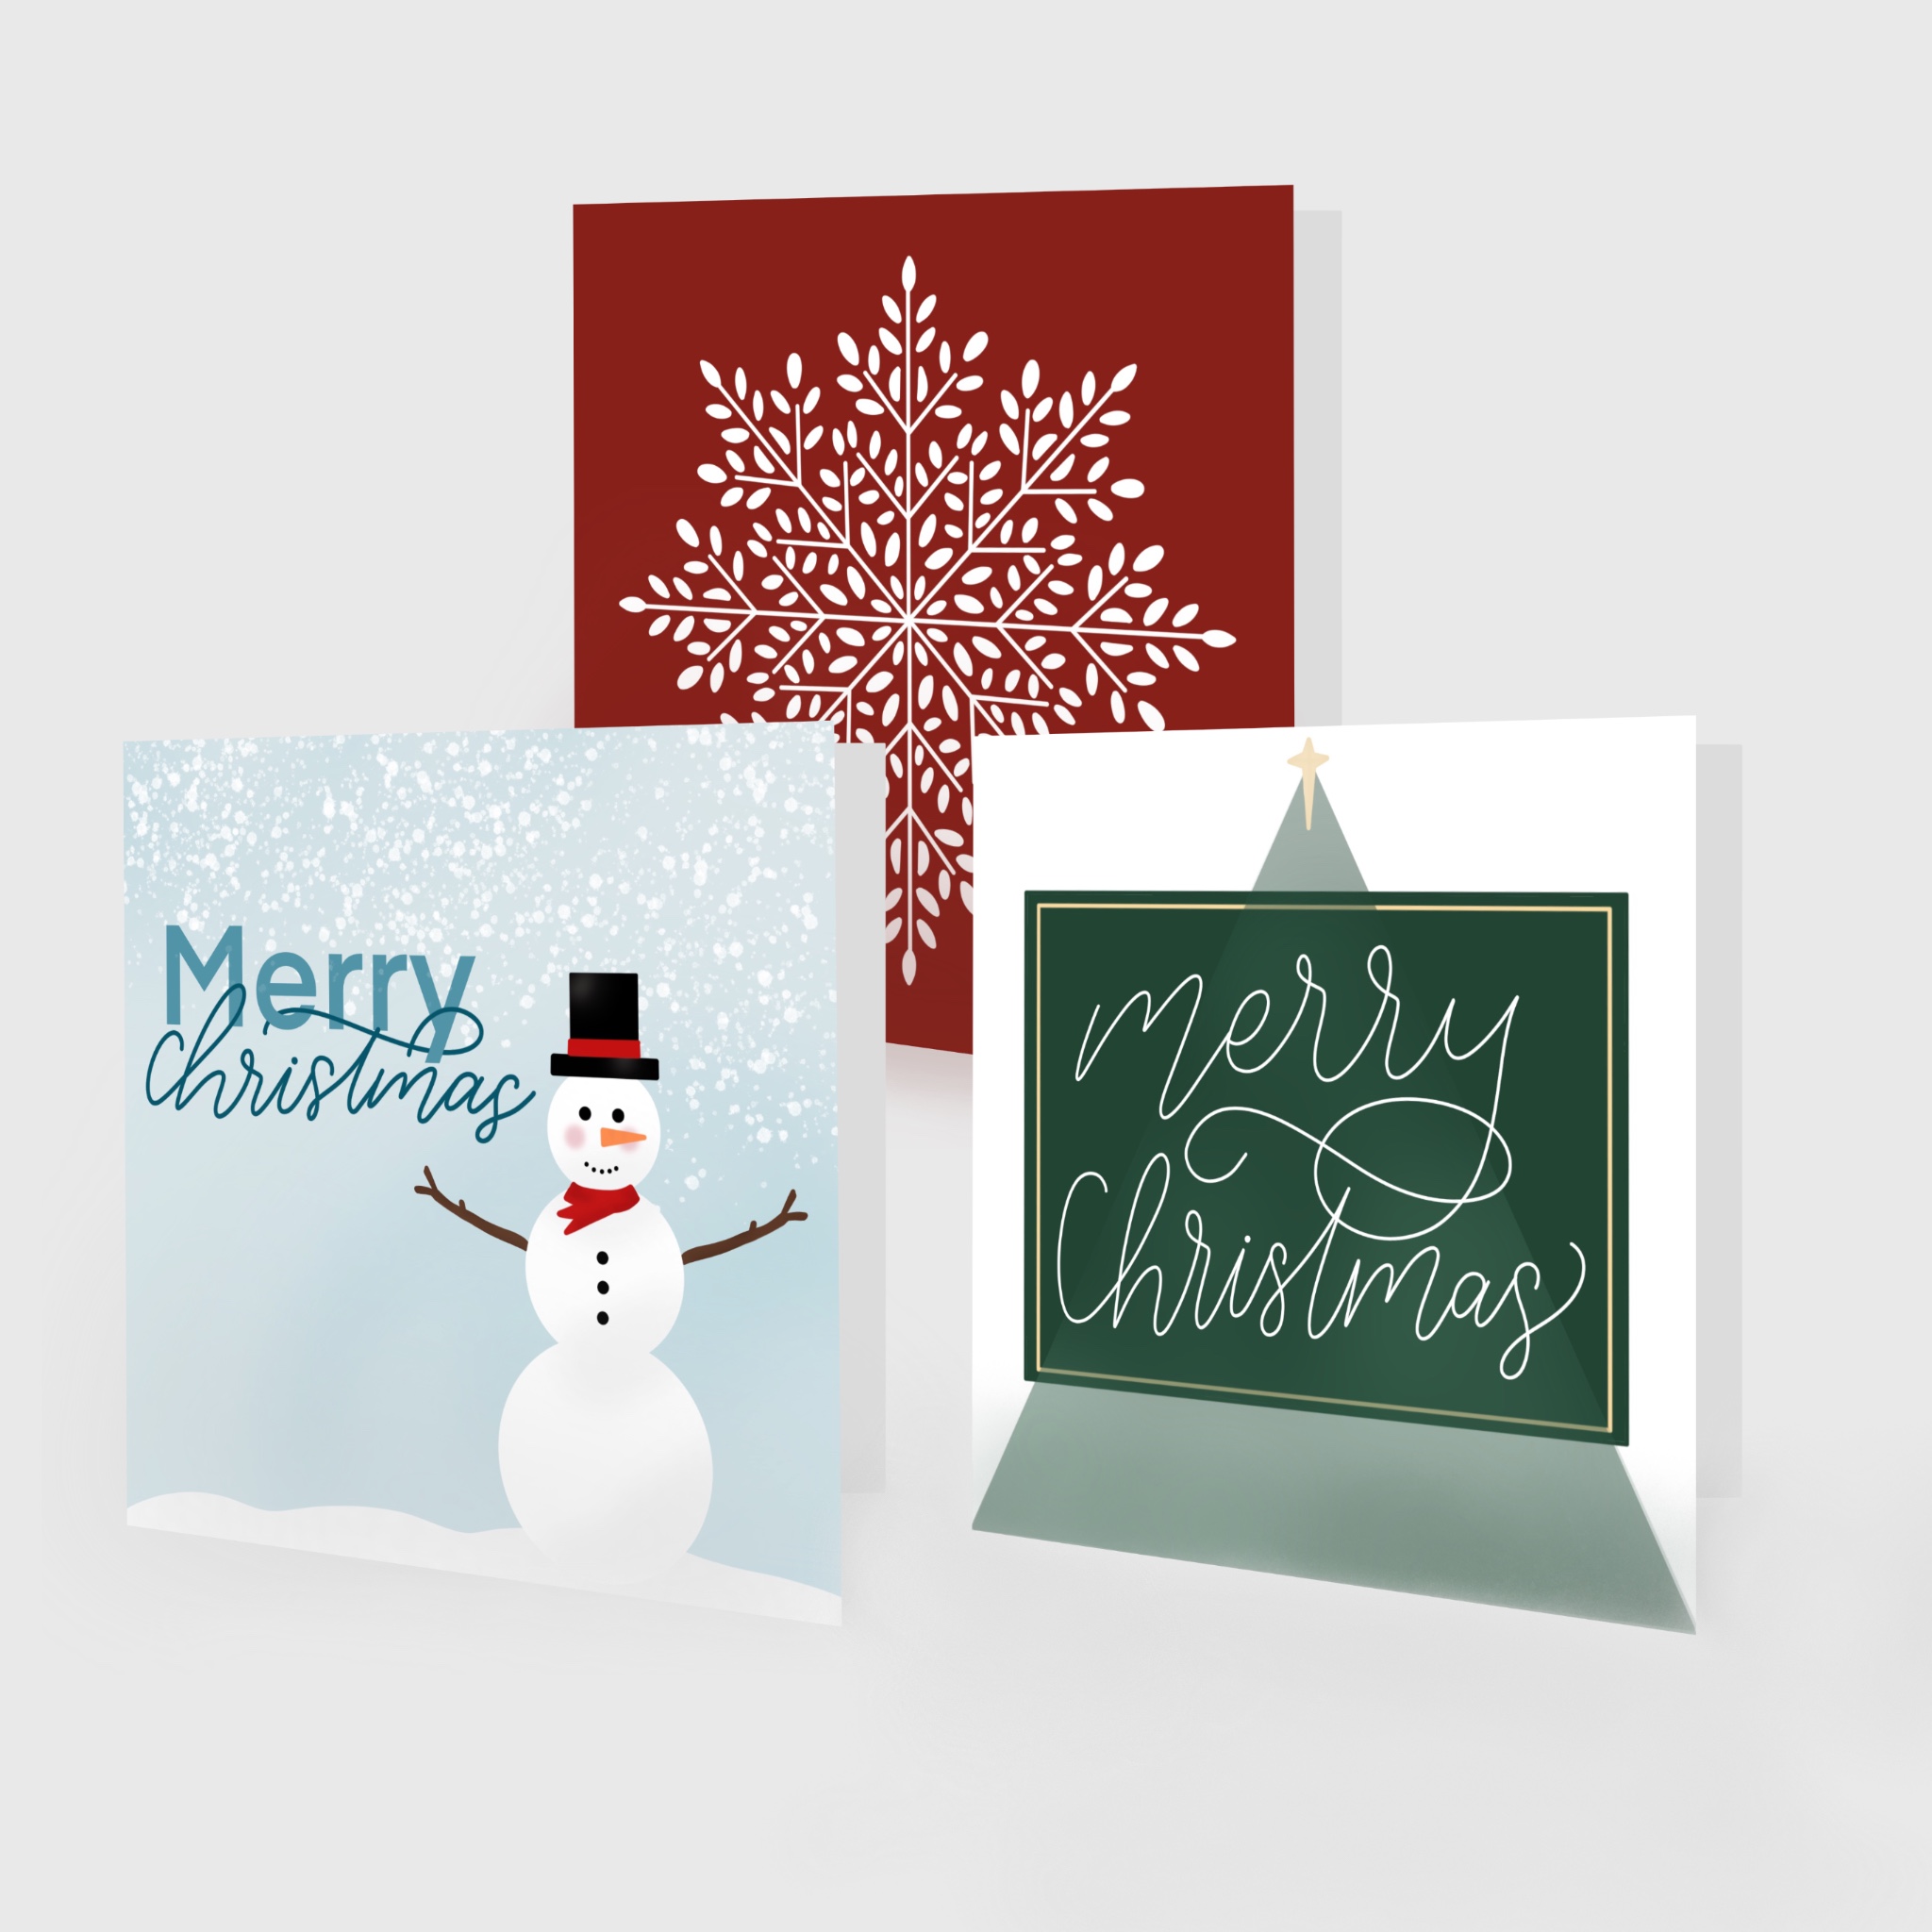 Three Christmas cards designed by Jennifer from Lettering for Jesus